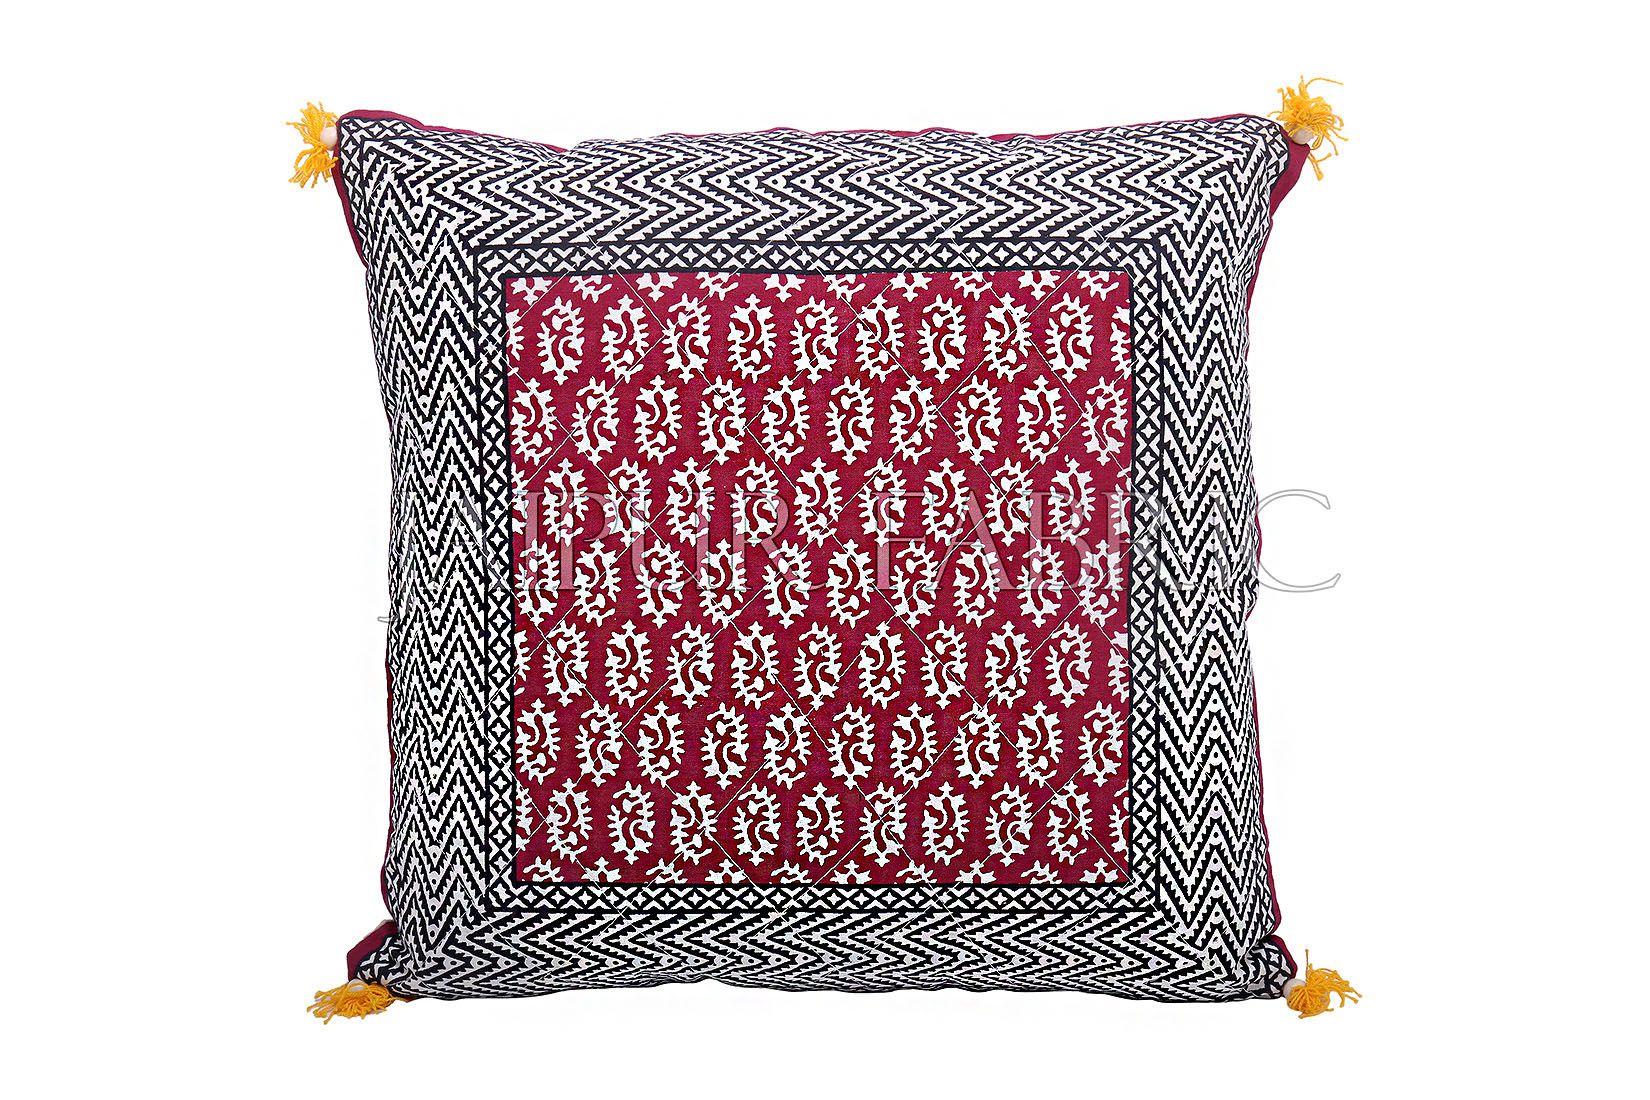 Maroon Color with Black Border Block Print Cotton Cushion Cover